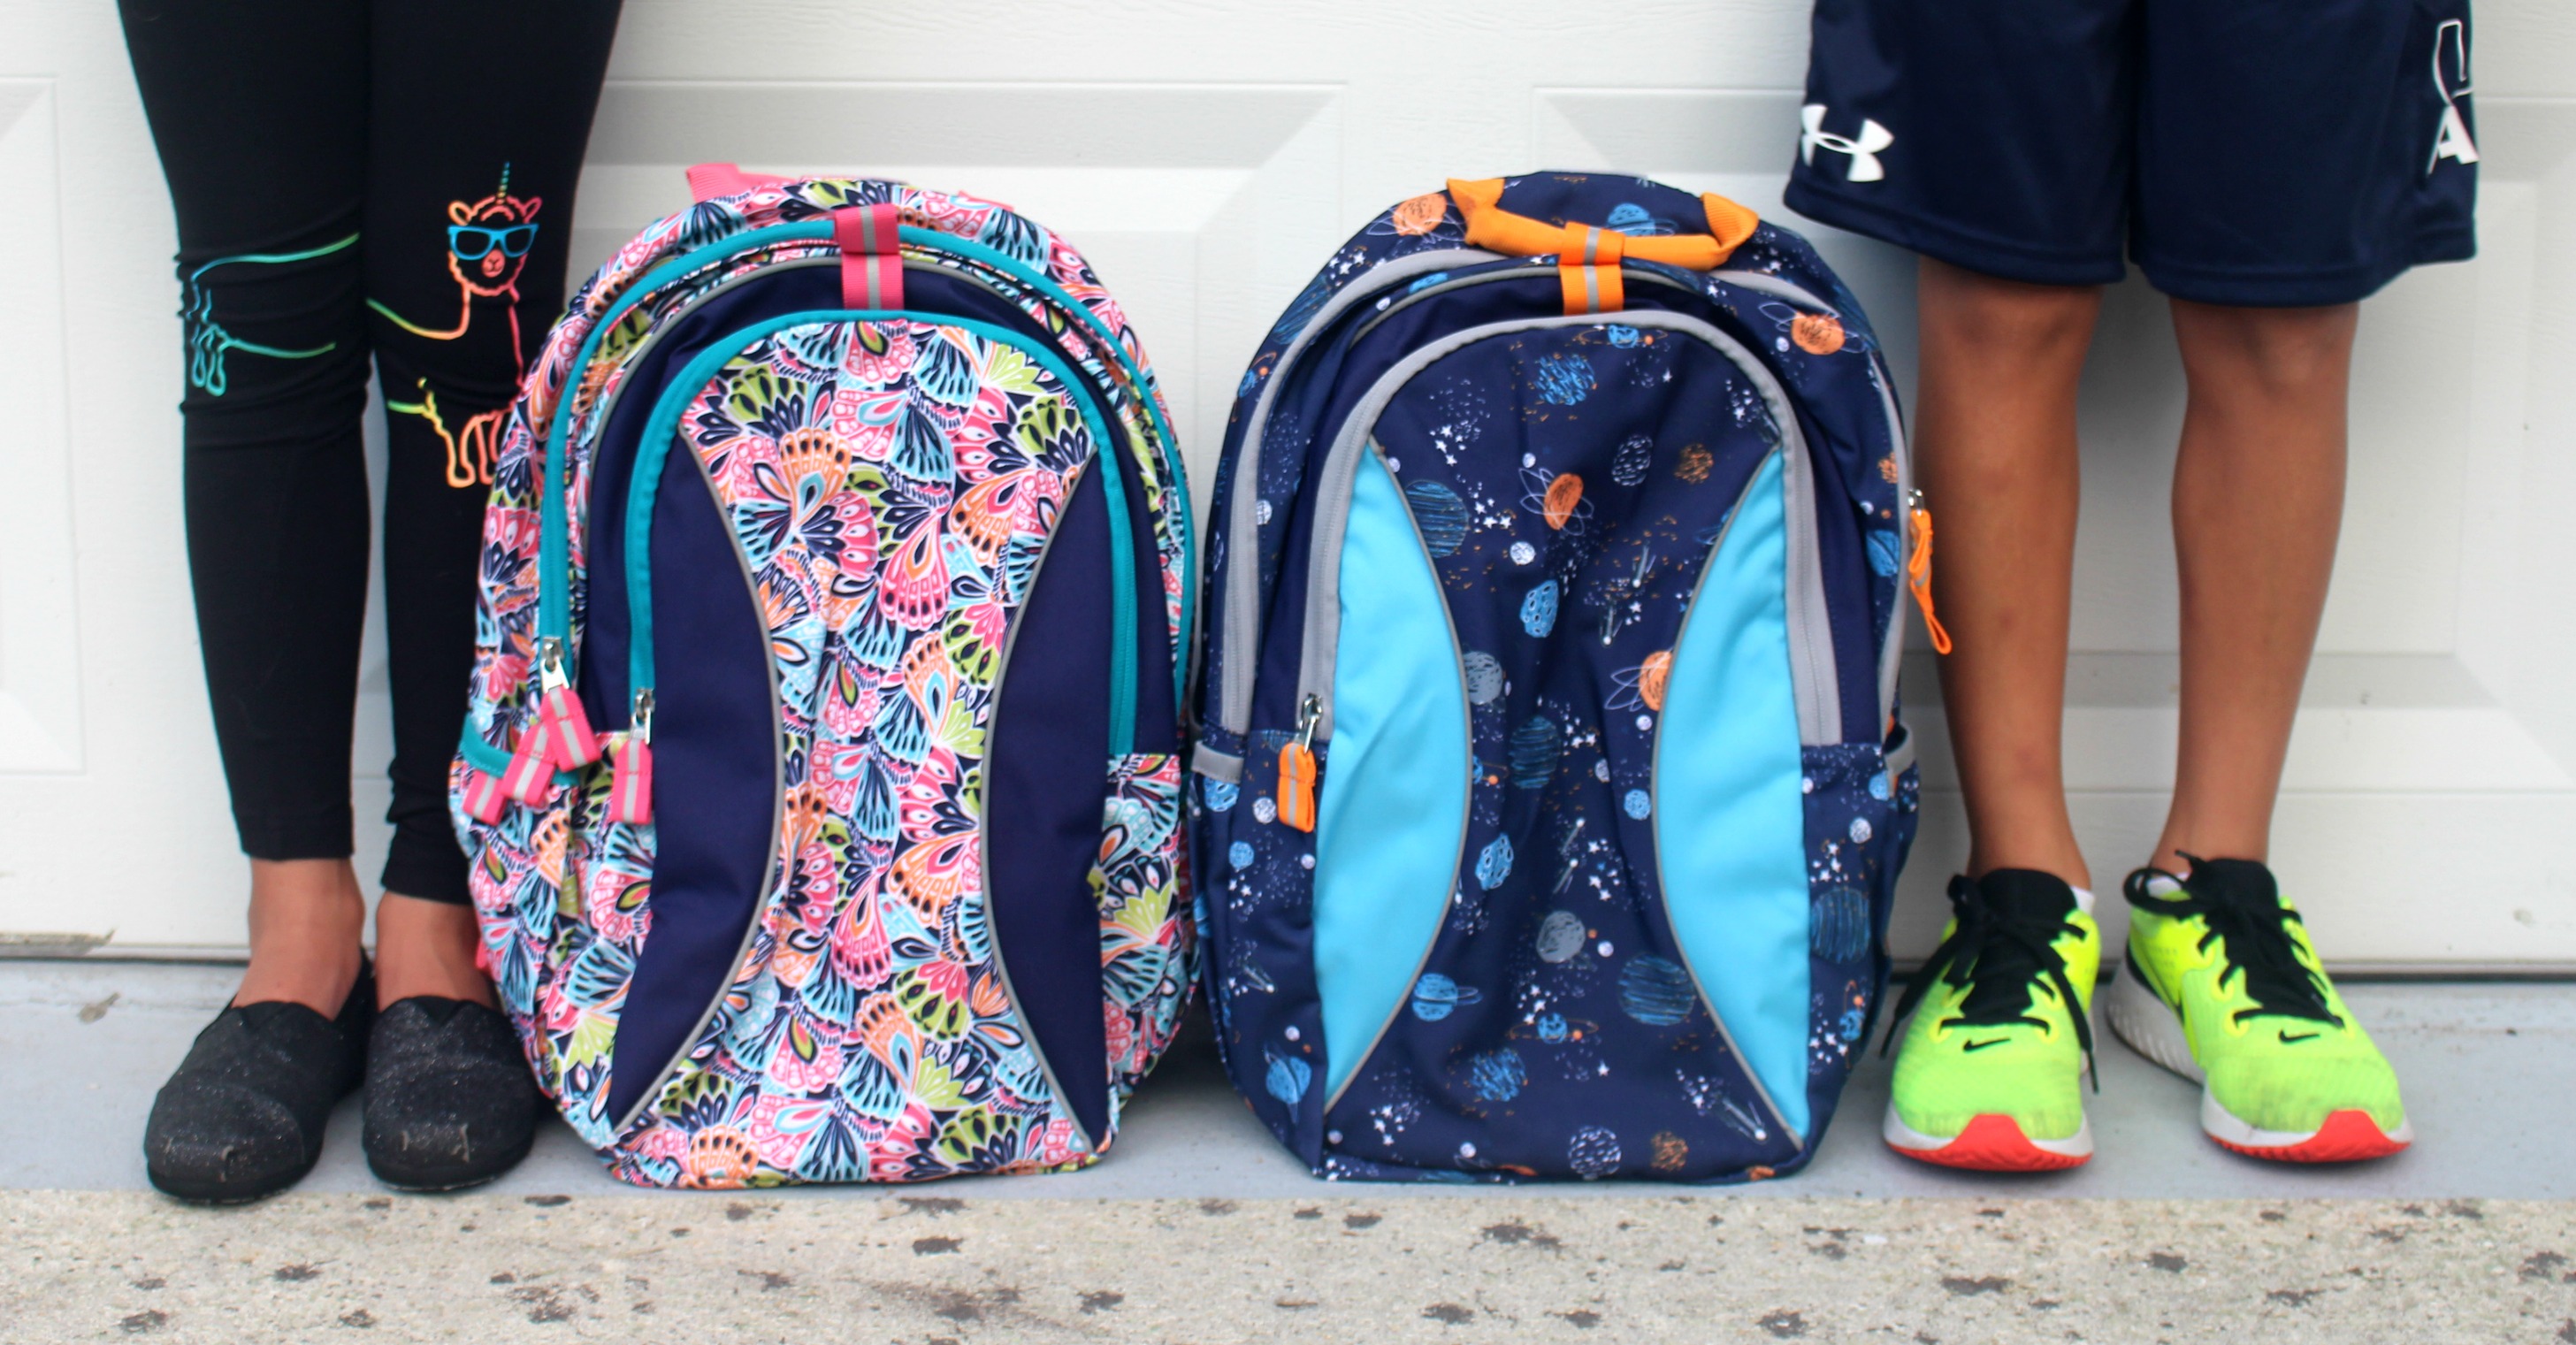 5 Easy Back To School Shopping Tips Every Mom Should Know About!